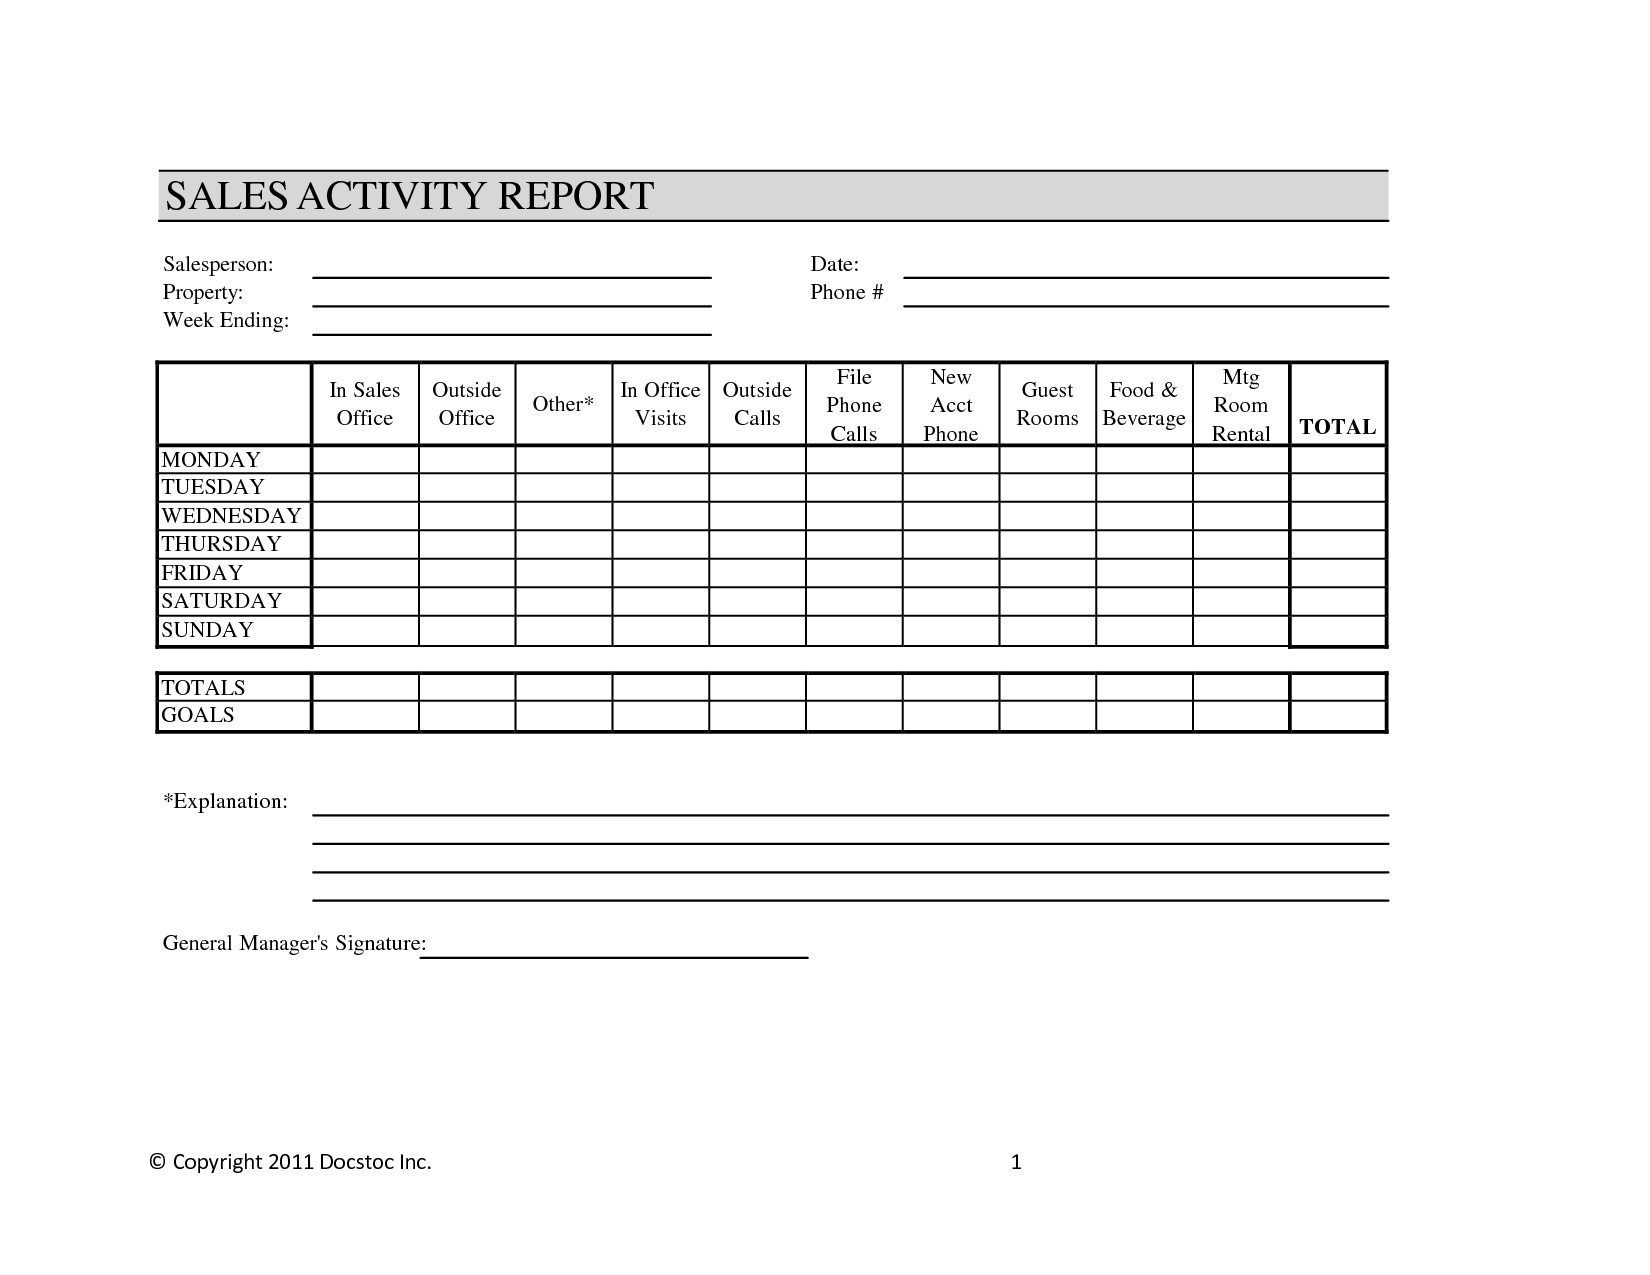 044 Daily Activity Report Template Weekly Sales Call 669158 With Sales Activity Report Template Excel